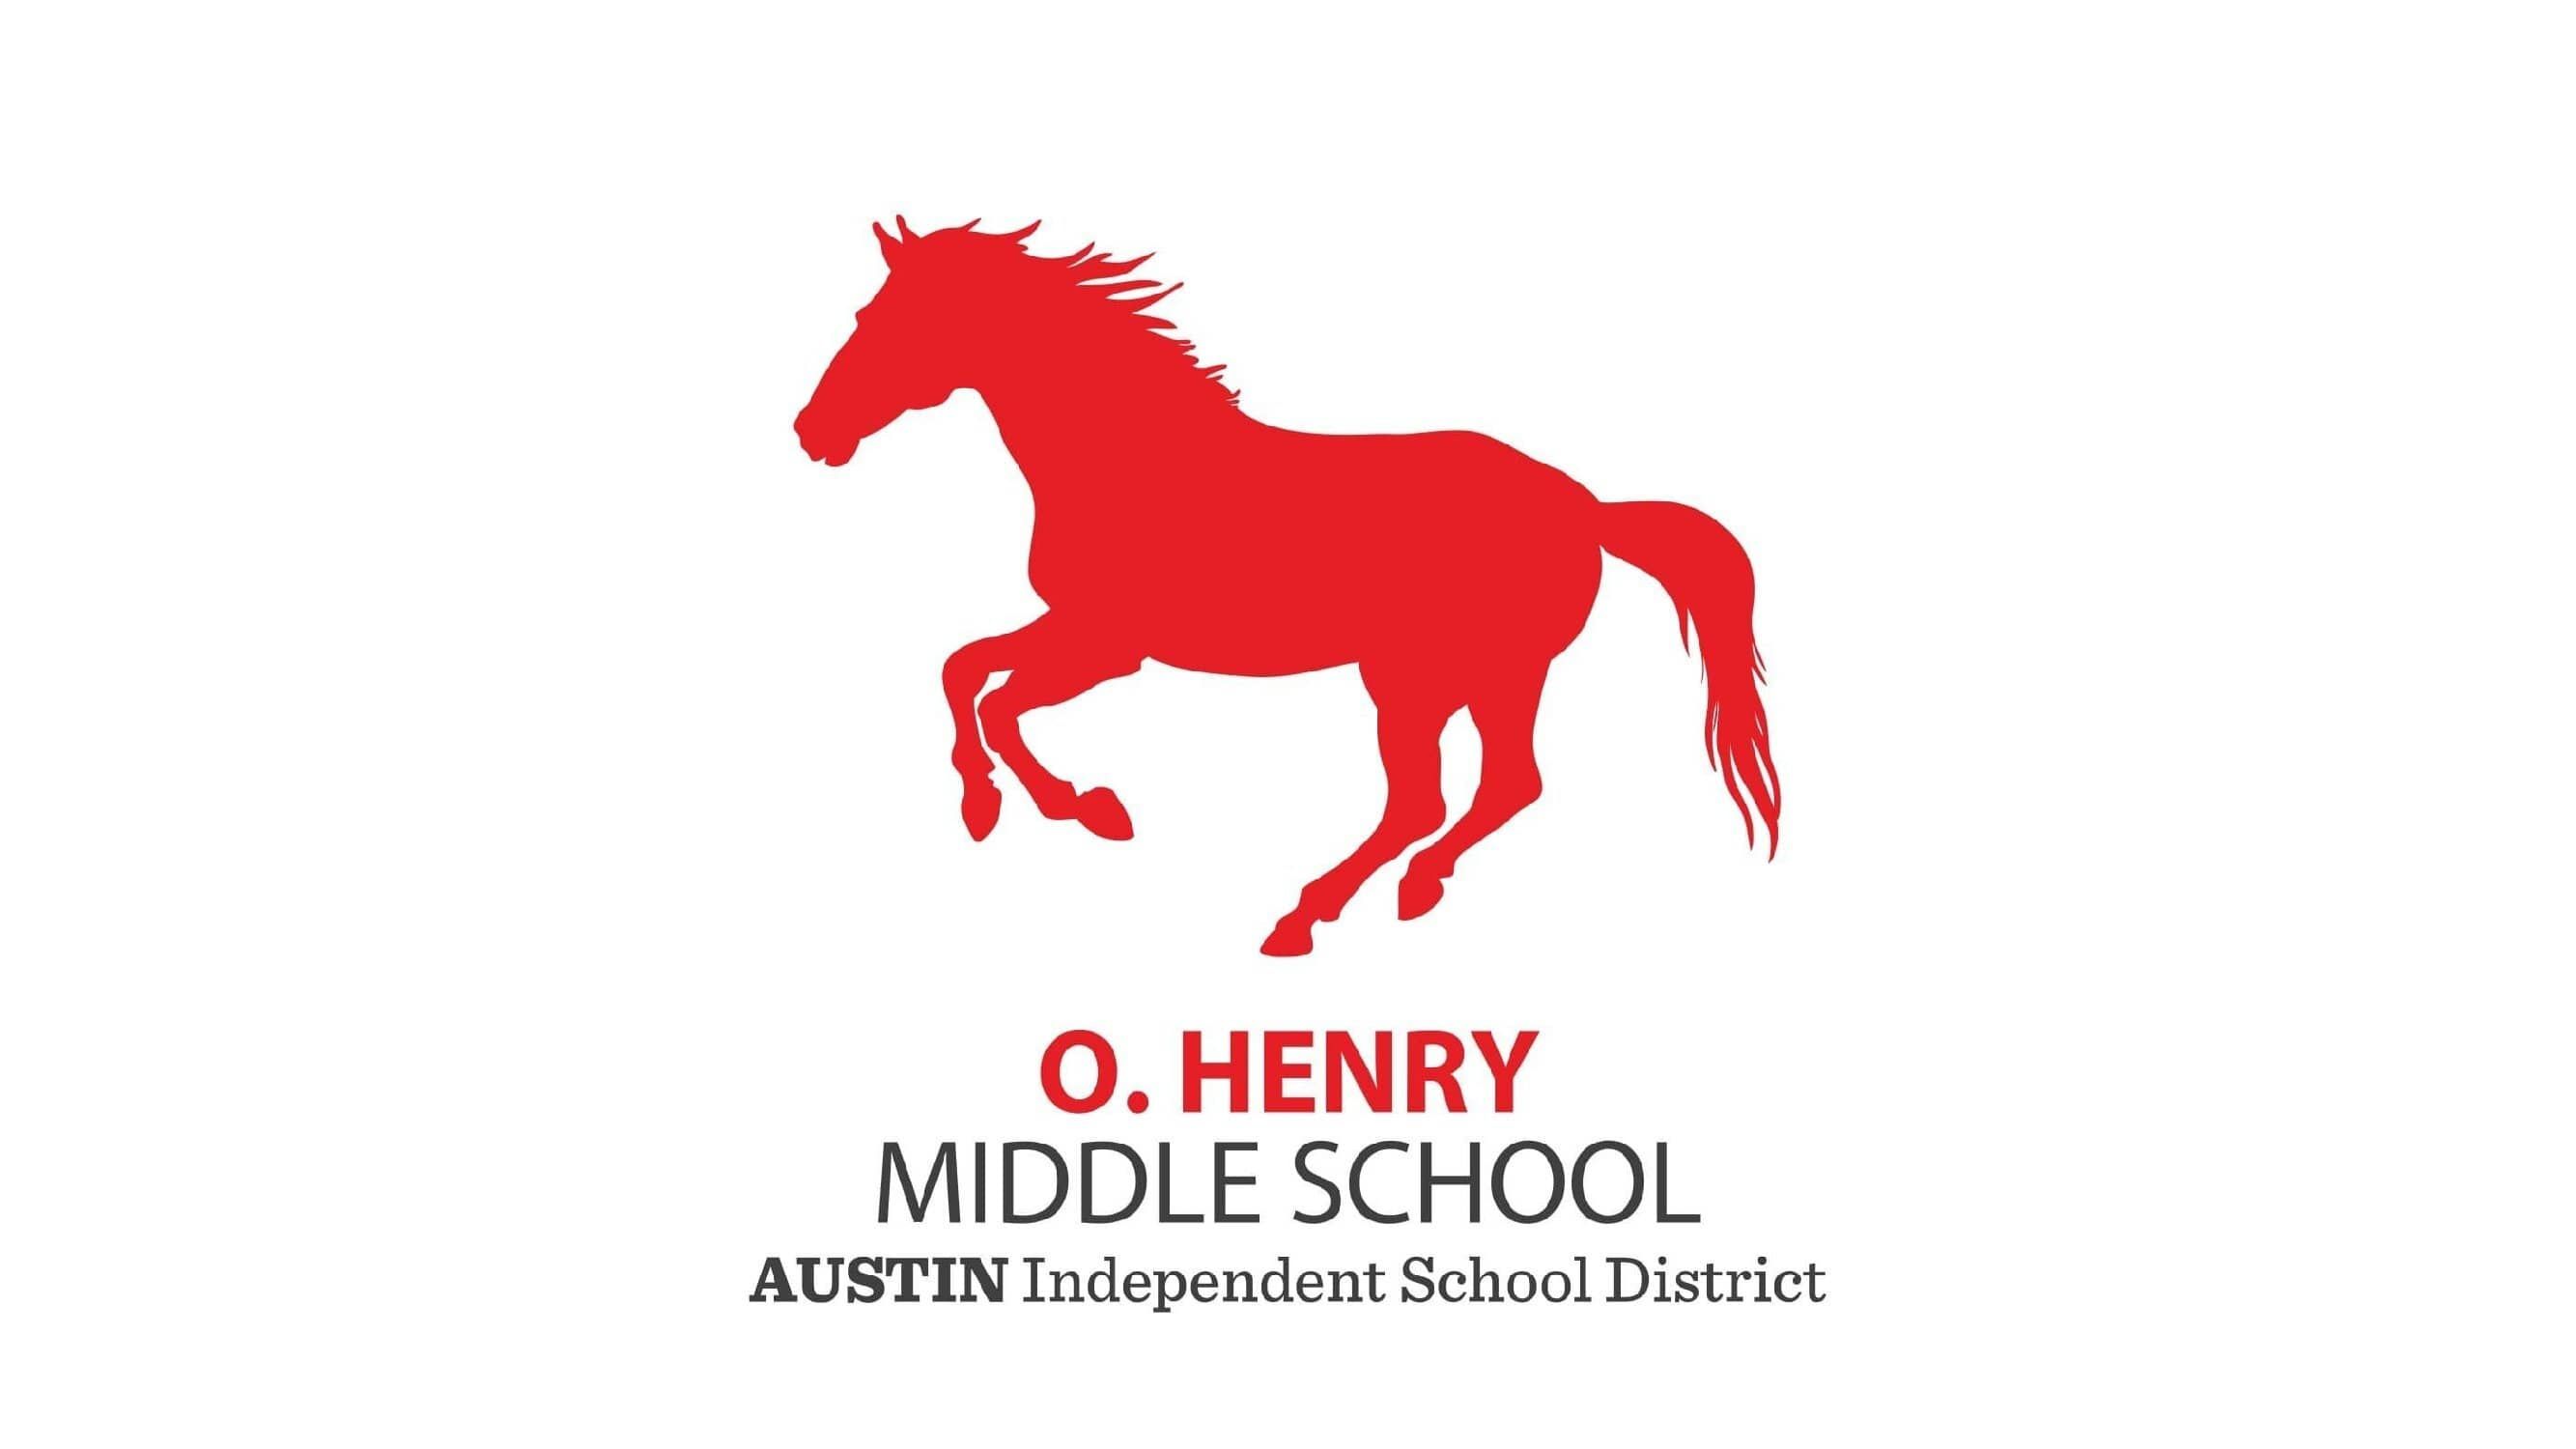 O. Henry Middle School